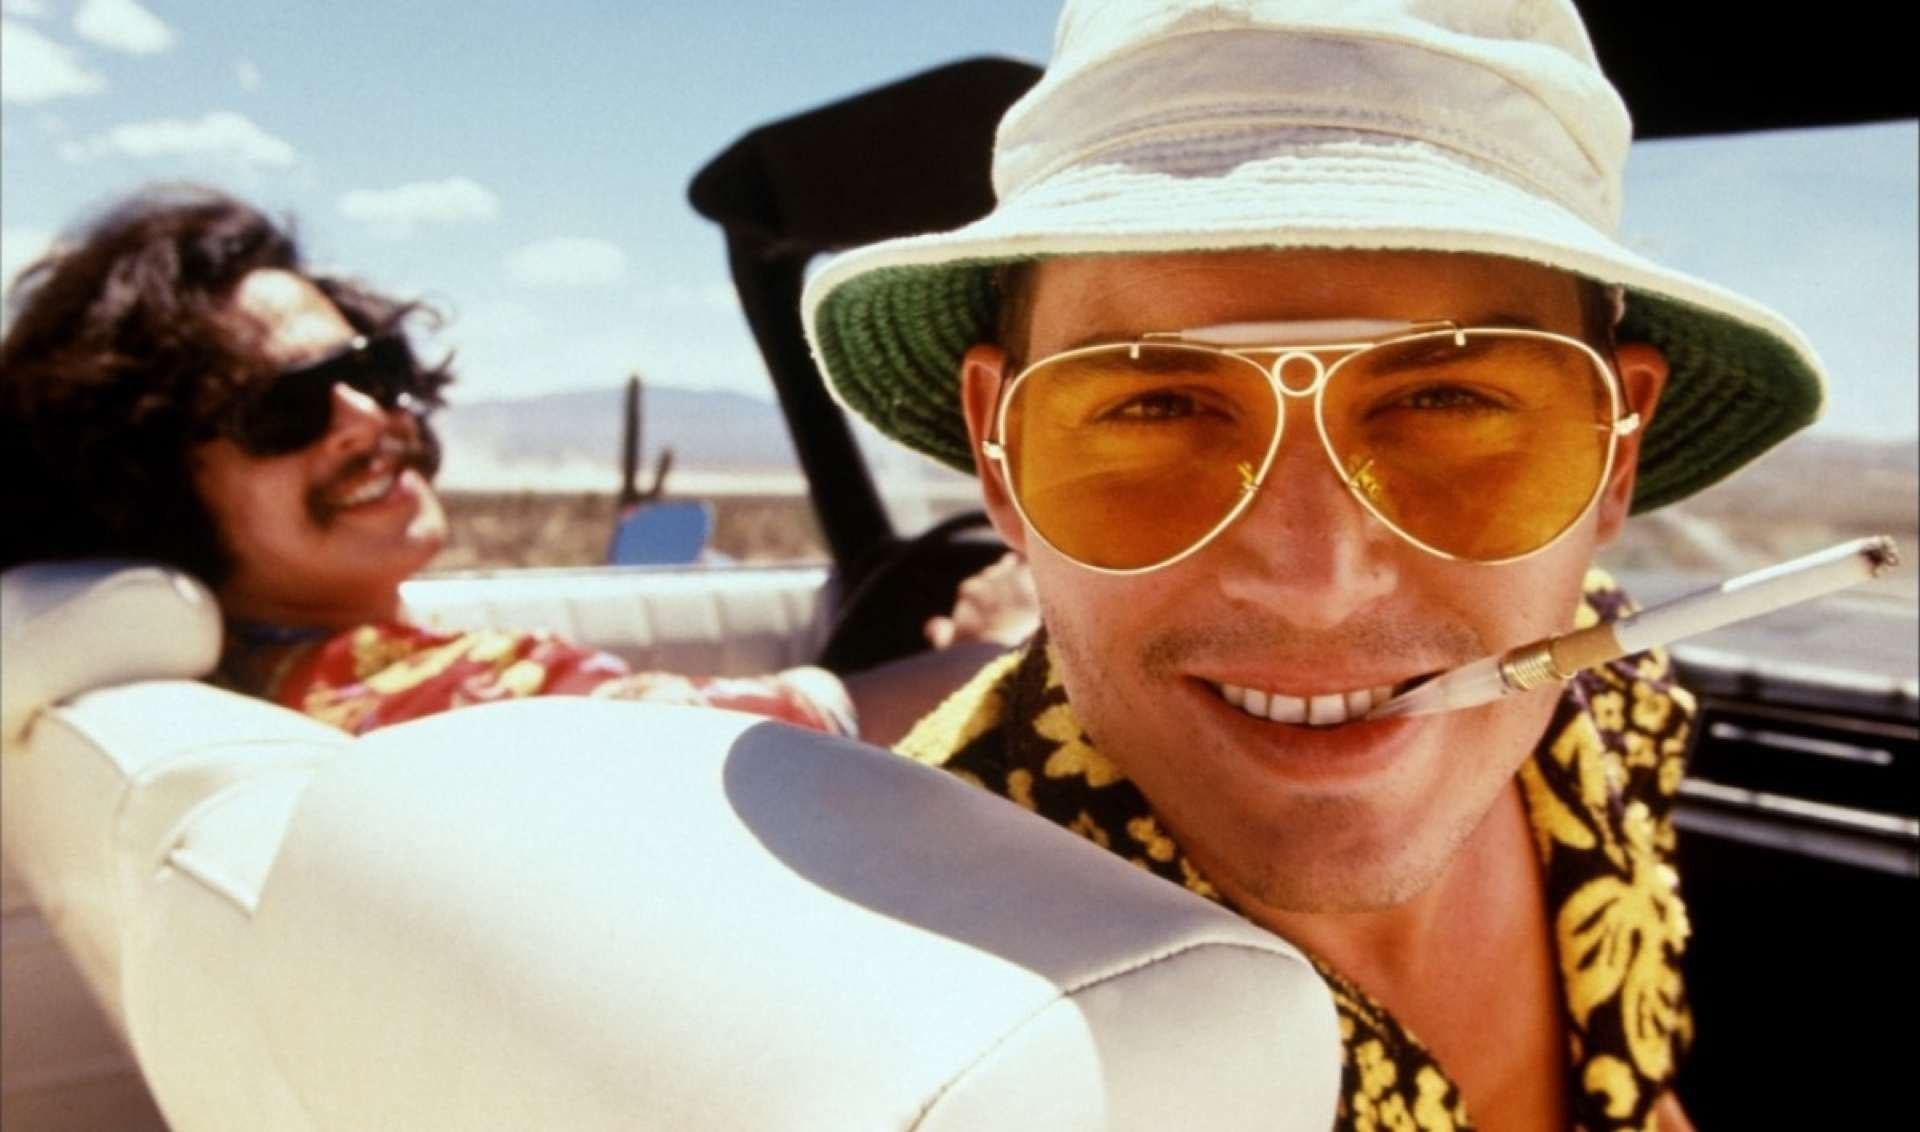 Depp played Thompson in Fear and Loathing in Las Vegas